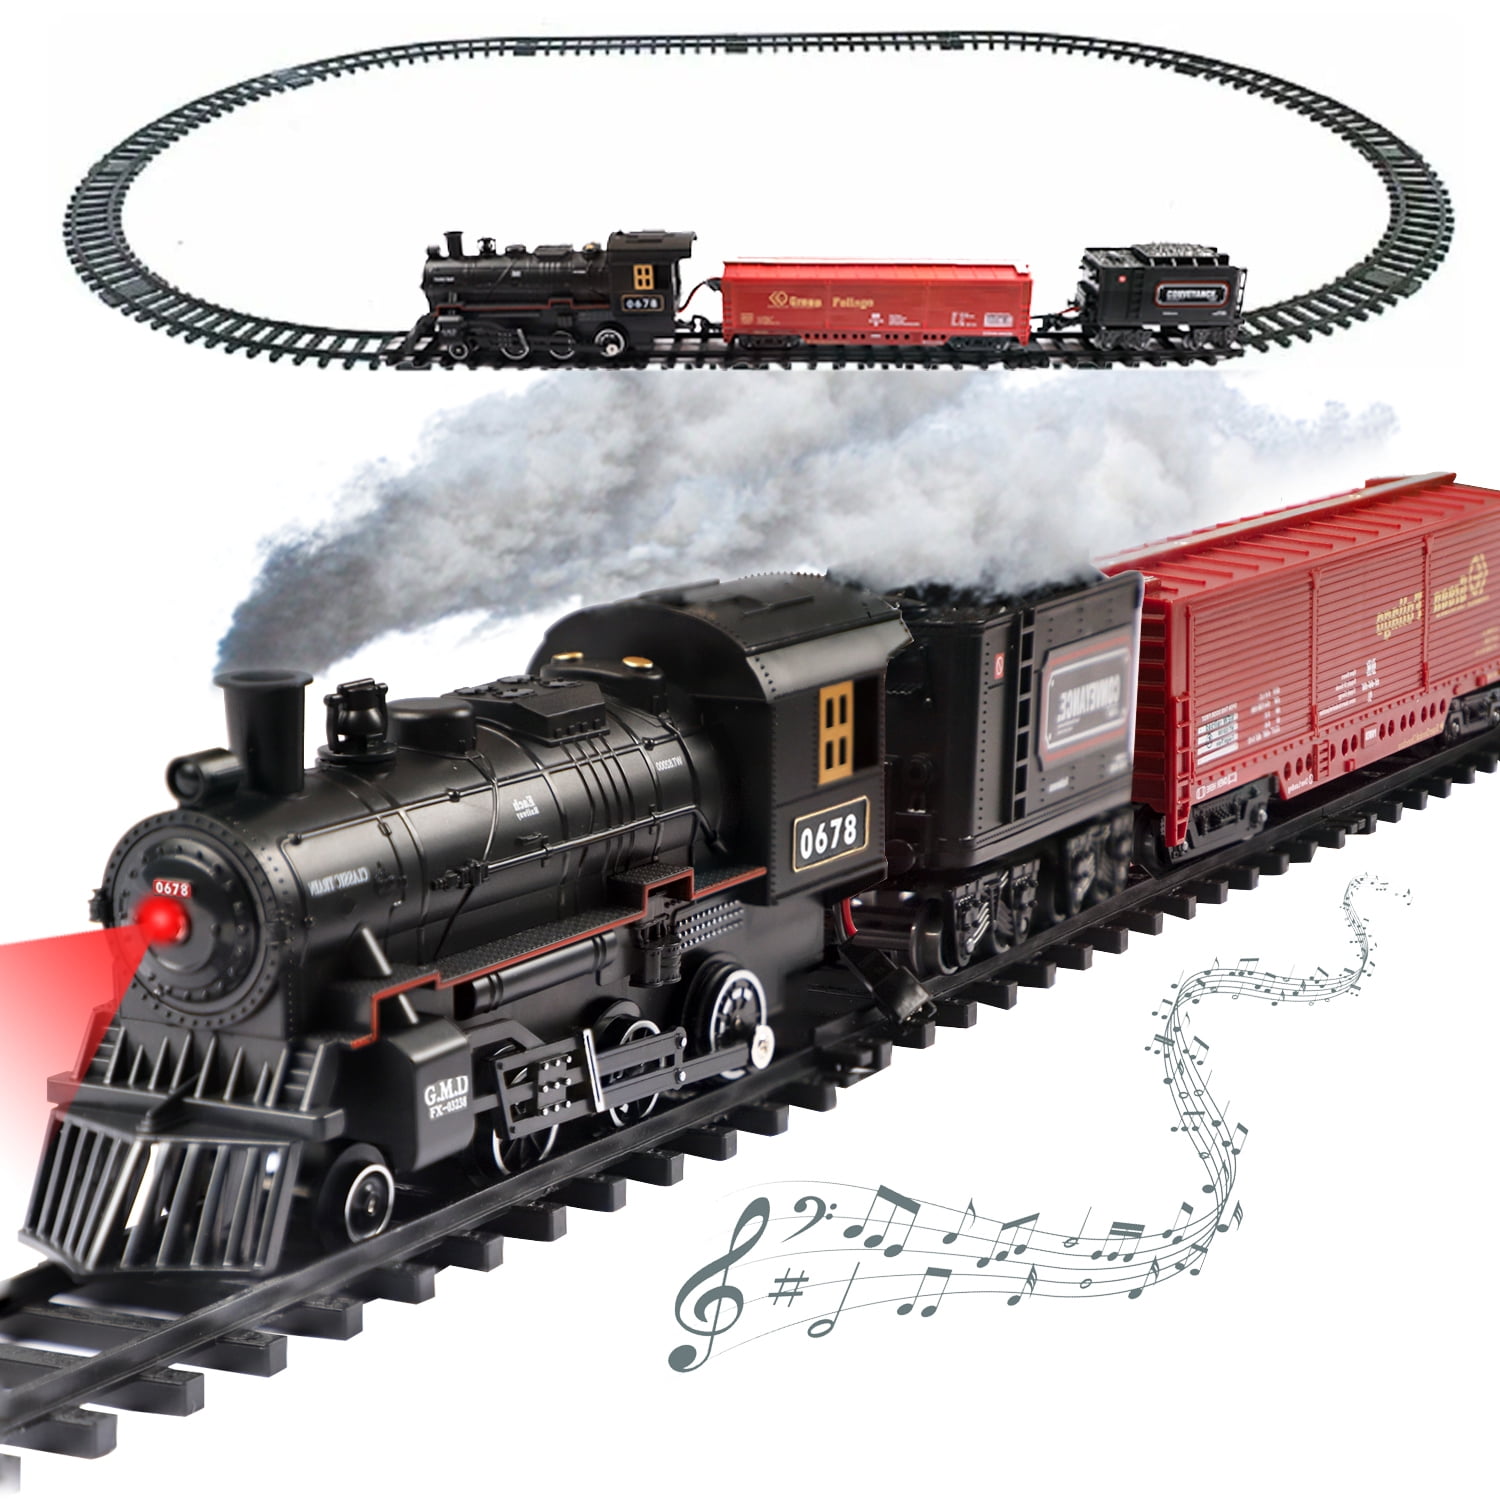  BRIO World 33592 Mighty Red Action Locomotive  Battery  Operated Toy Train with Light and Sound Effects for Kids Age 3 and Up :  Toys & Games